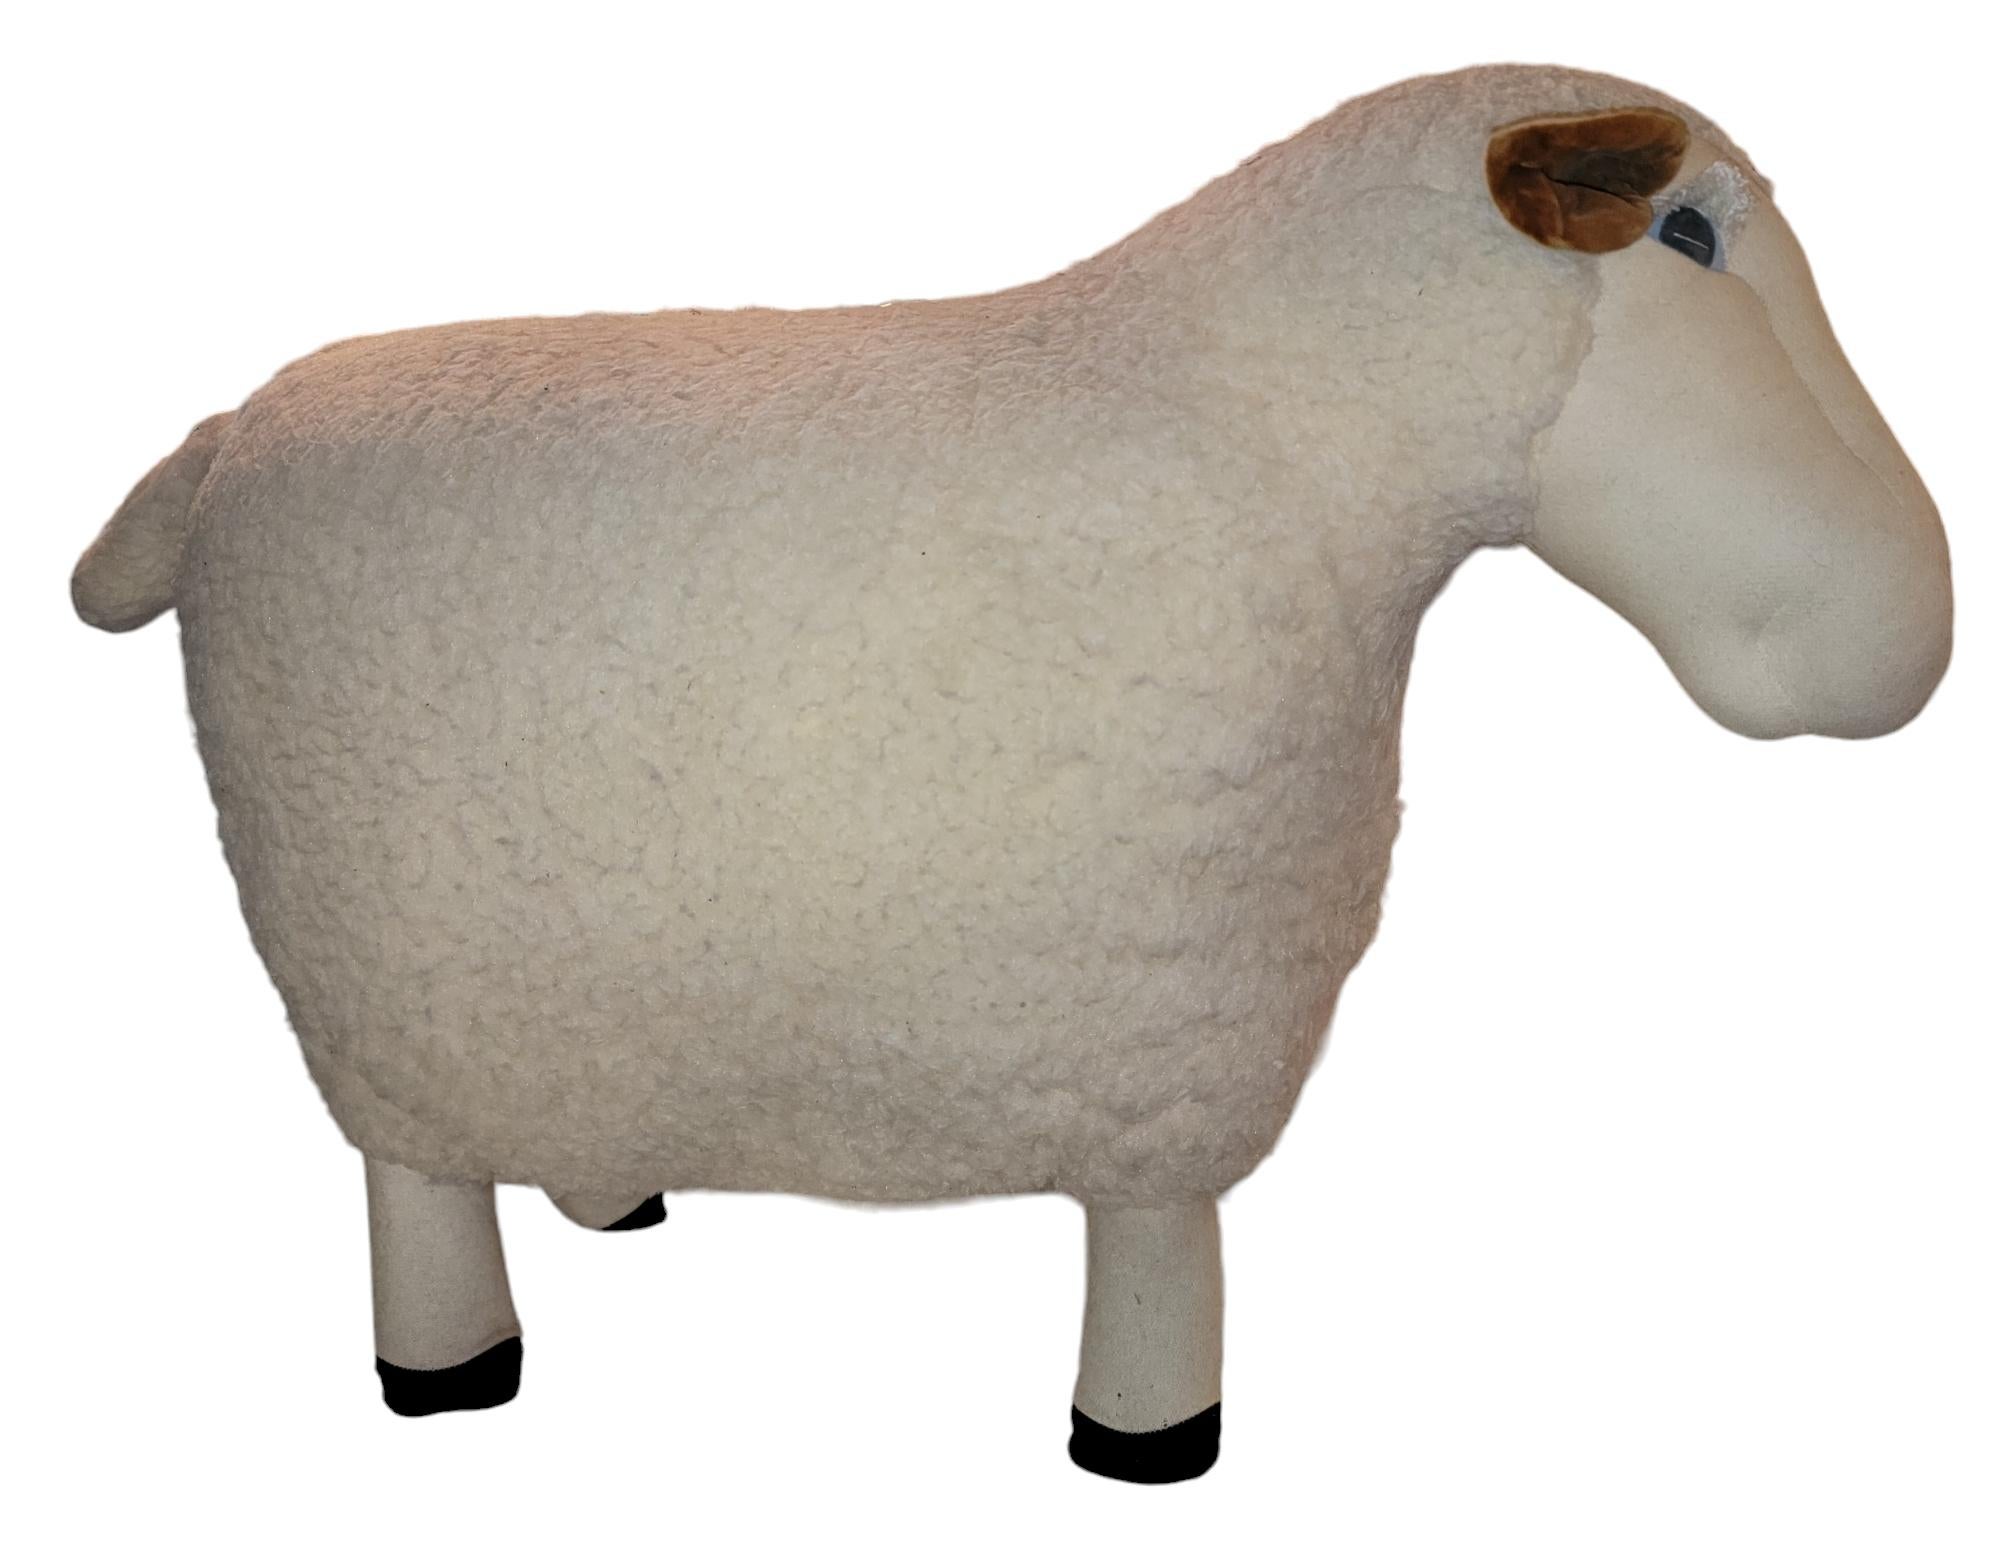 80s Decorative Standing Stool Sheep in wool With Fabric Legs. The wool goes all the way through the body to the bottom o the sheep in which the legs are sewn onto the wool. Measures approx - 13d  x24 h x 33w

This piece is sturdy. We have tested the